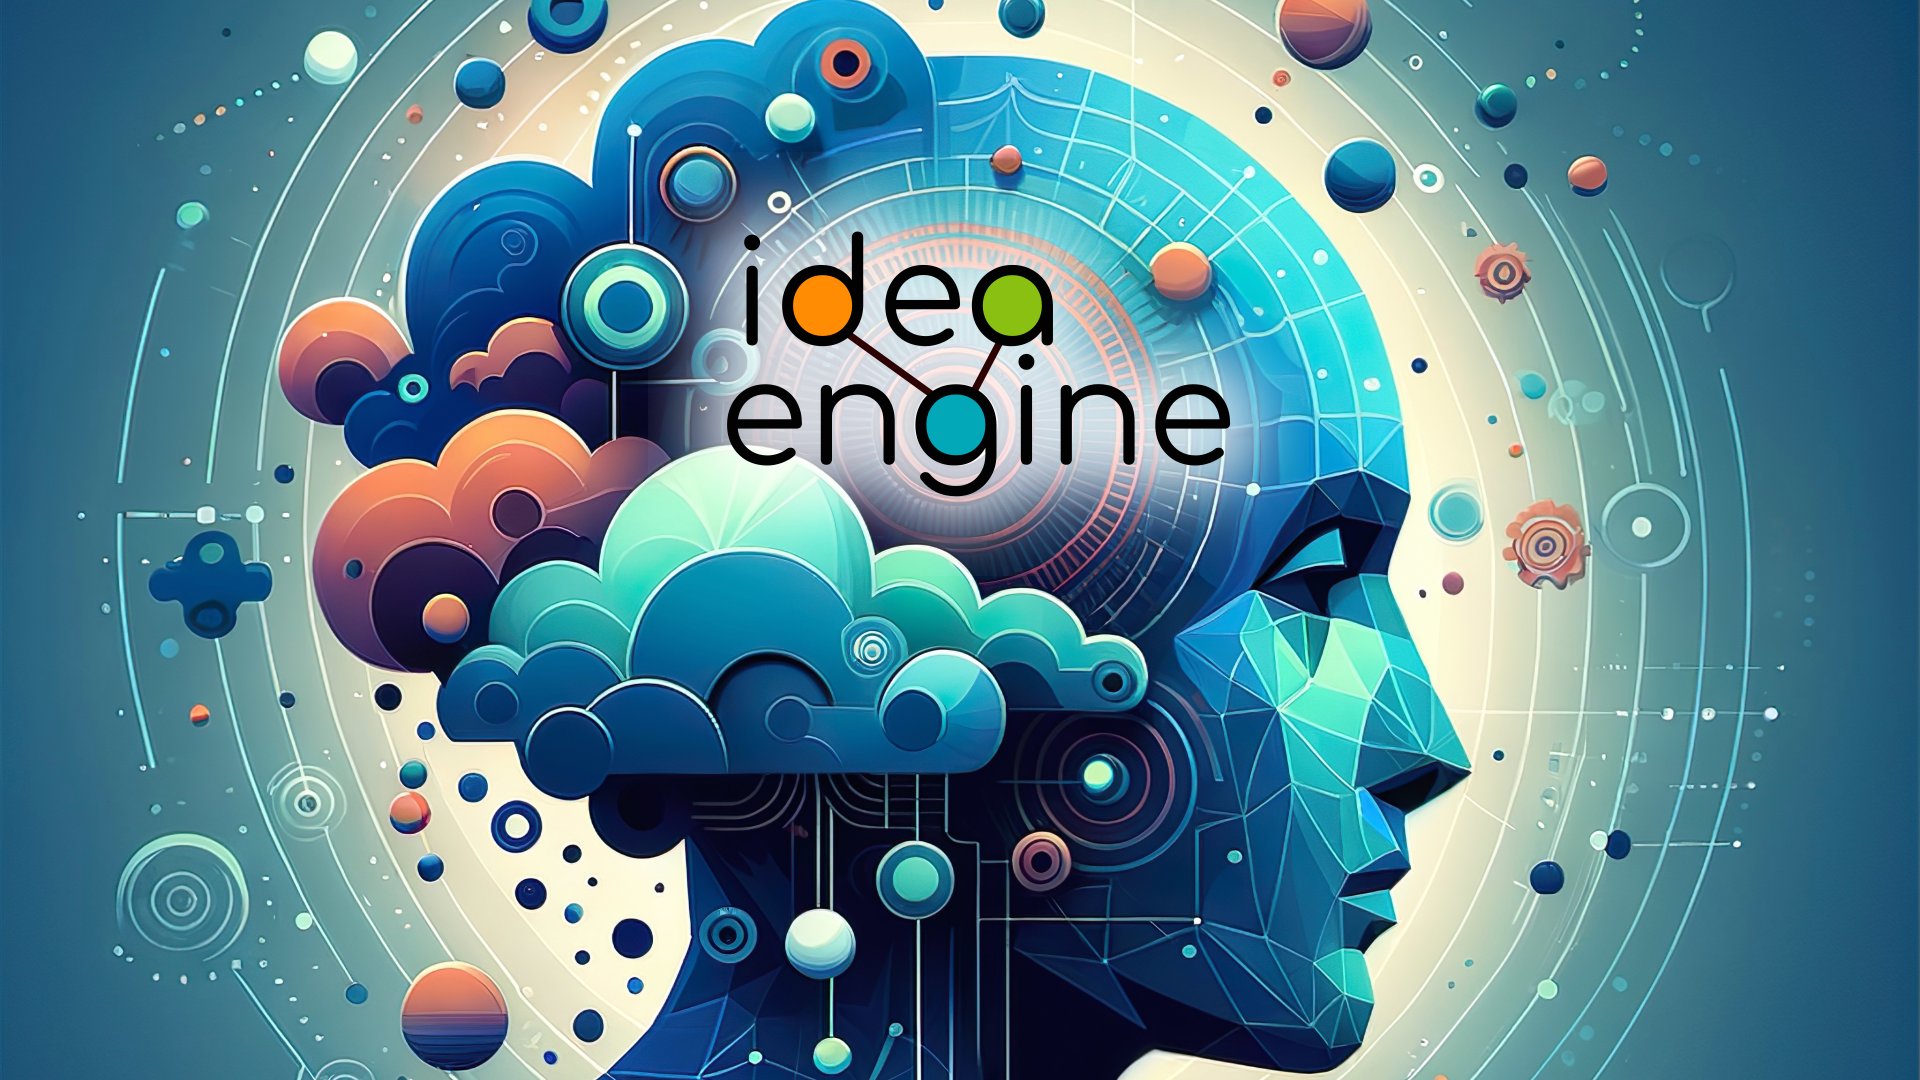 Exploring XR User Interface Interactions in ‘Idea Engine’